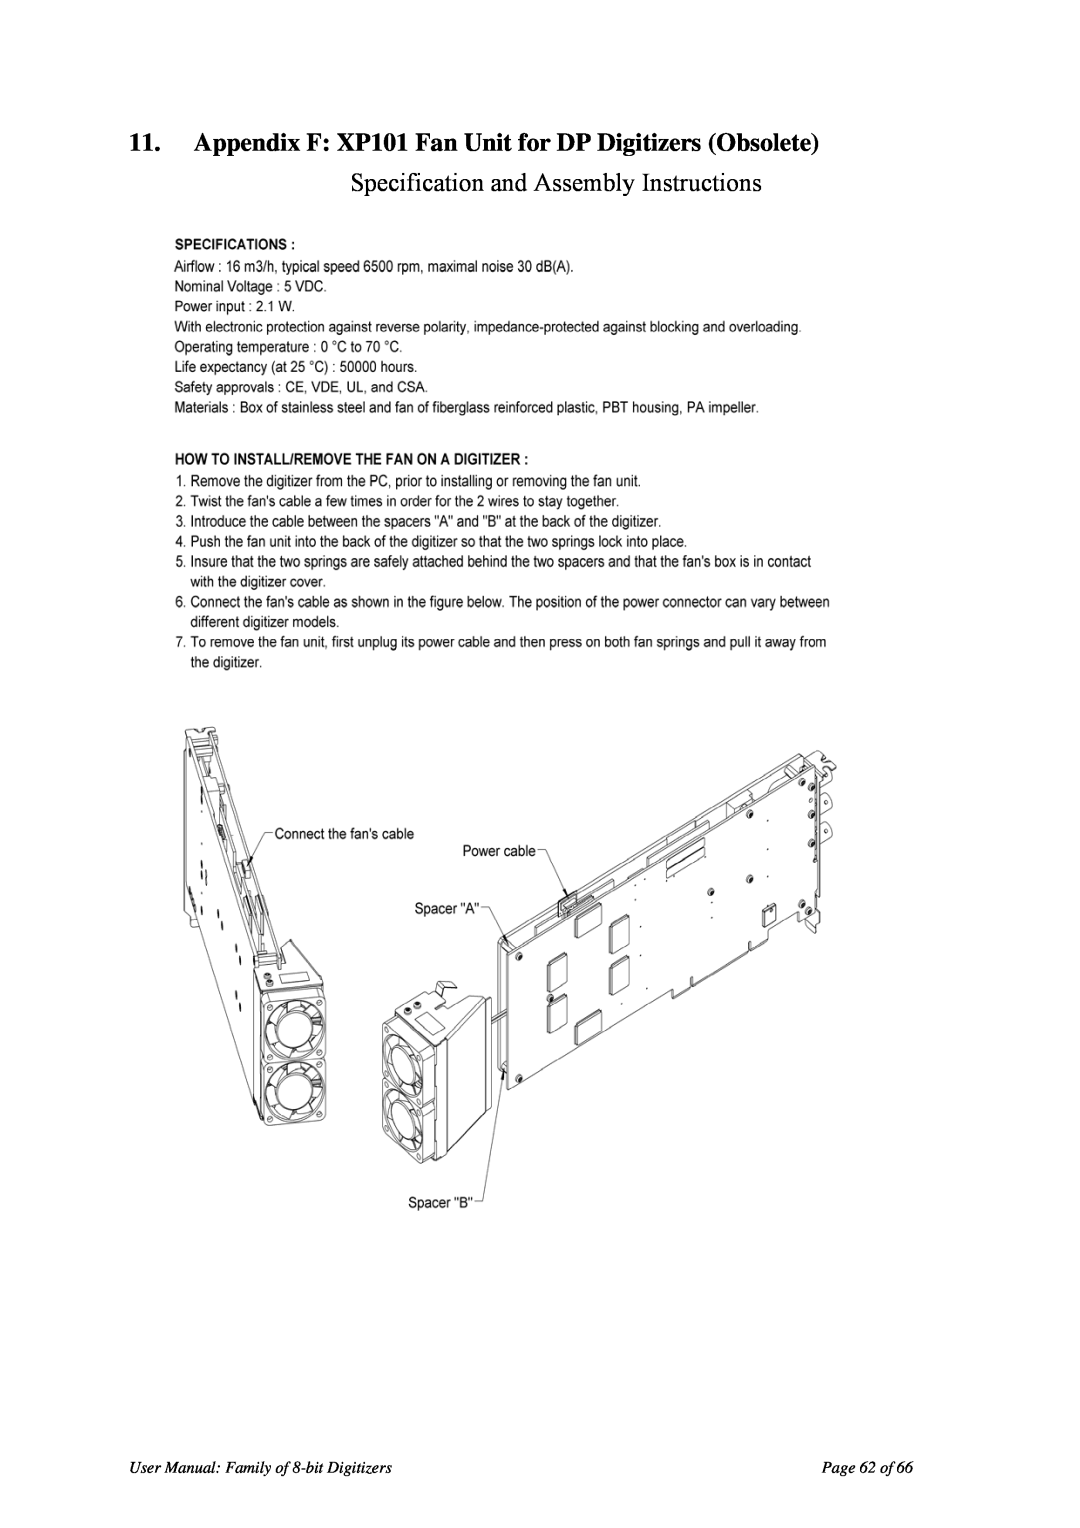 Agilent Technologies DP214, DP240, DP212, DP110, DP1400, DP111, DP210, DP235 User Manual Family of 8-bit Digitizers, Page 62 of 